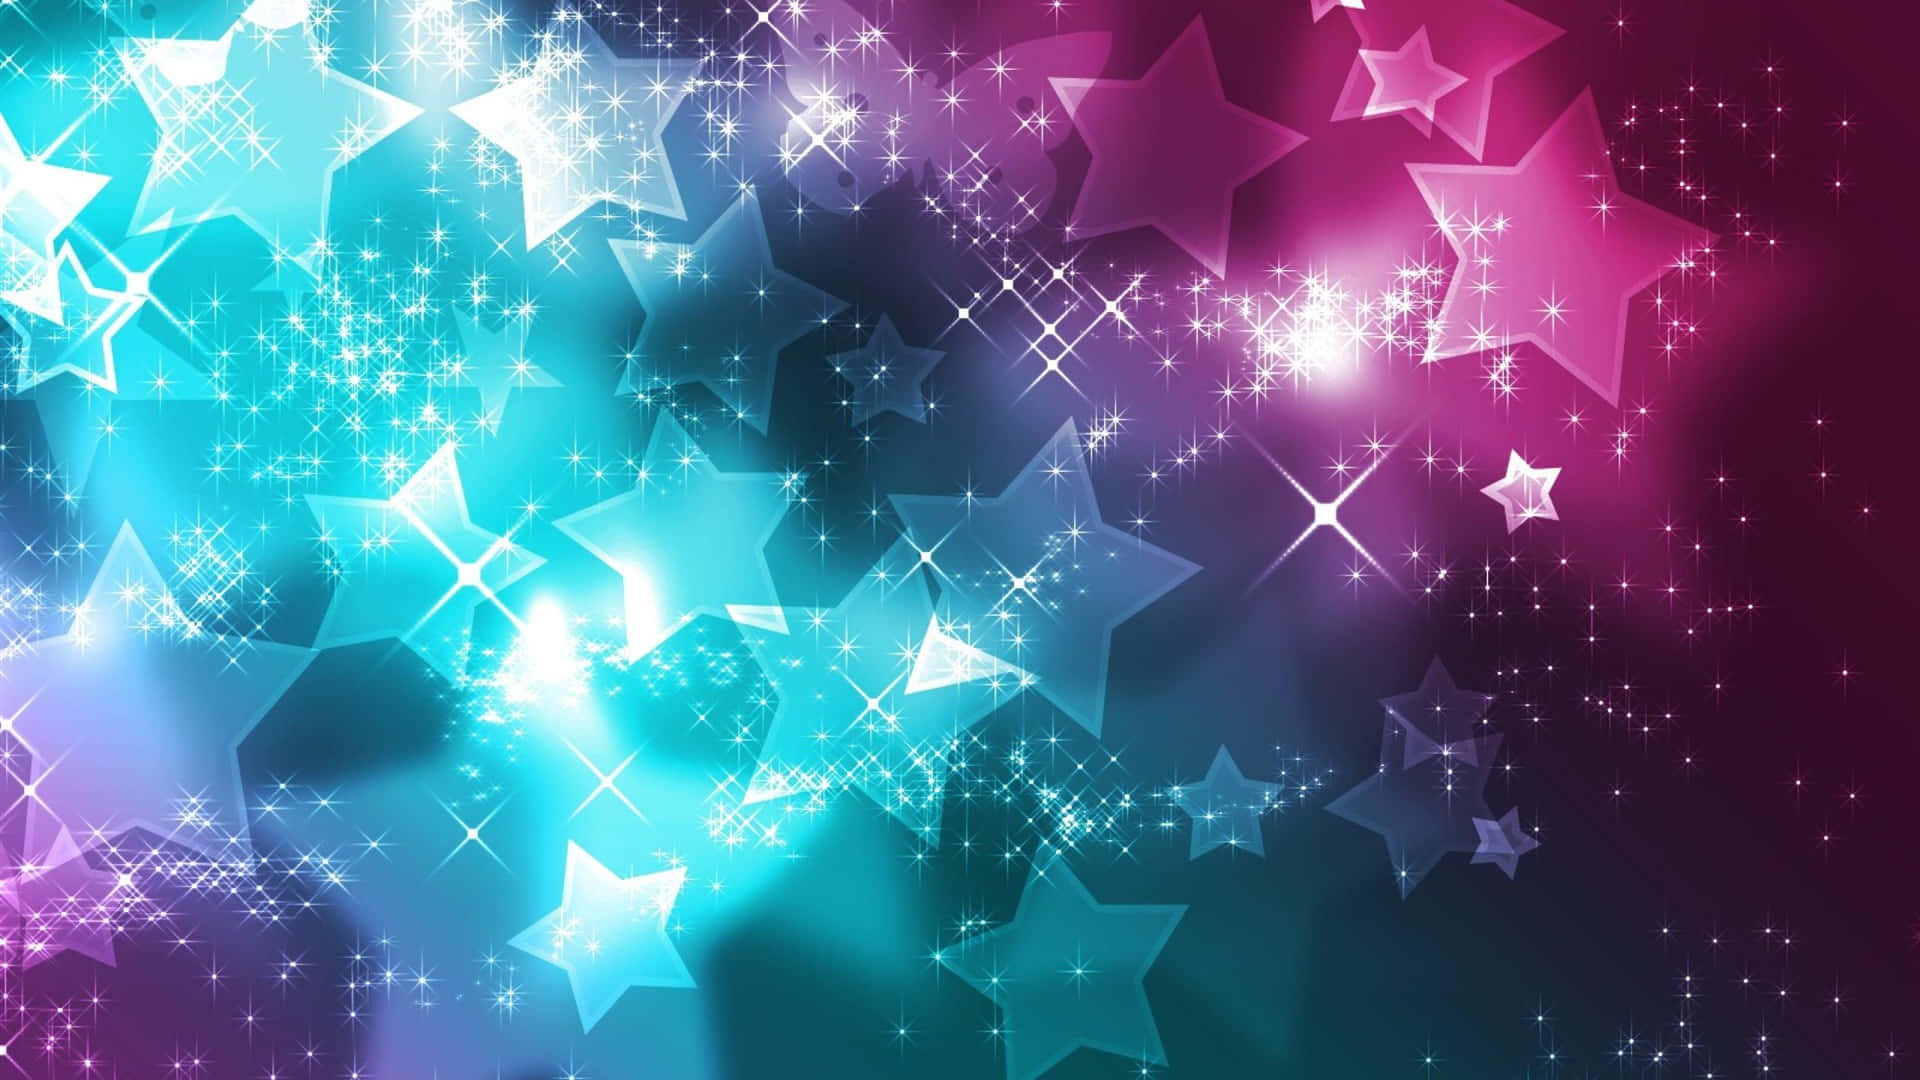 A Colorful Background With Stars And Lights Wallpaper